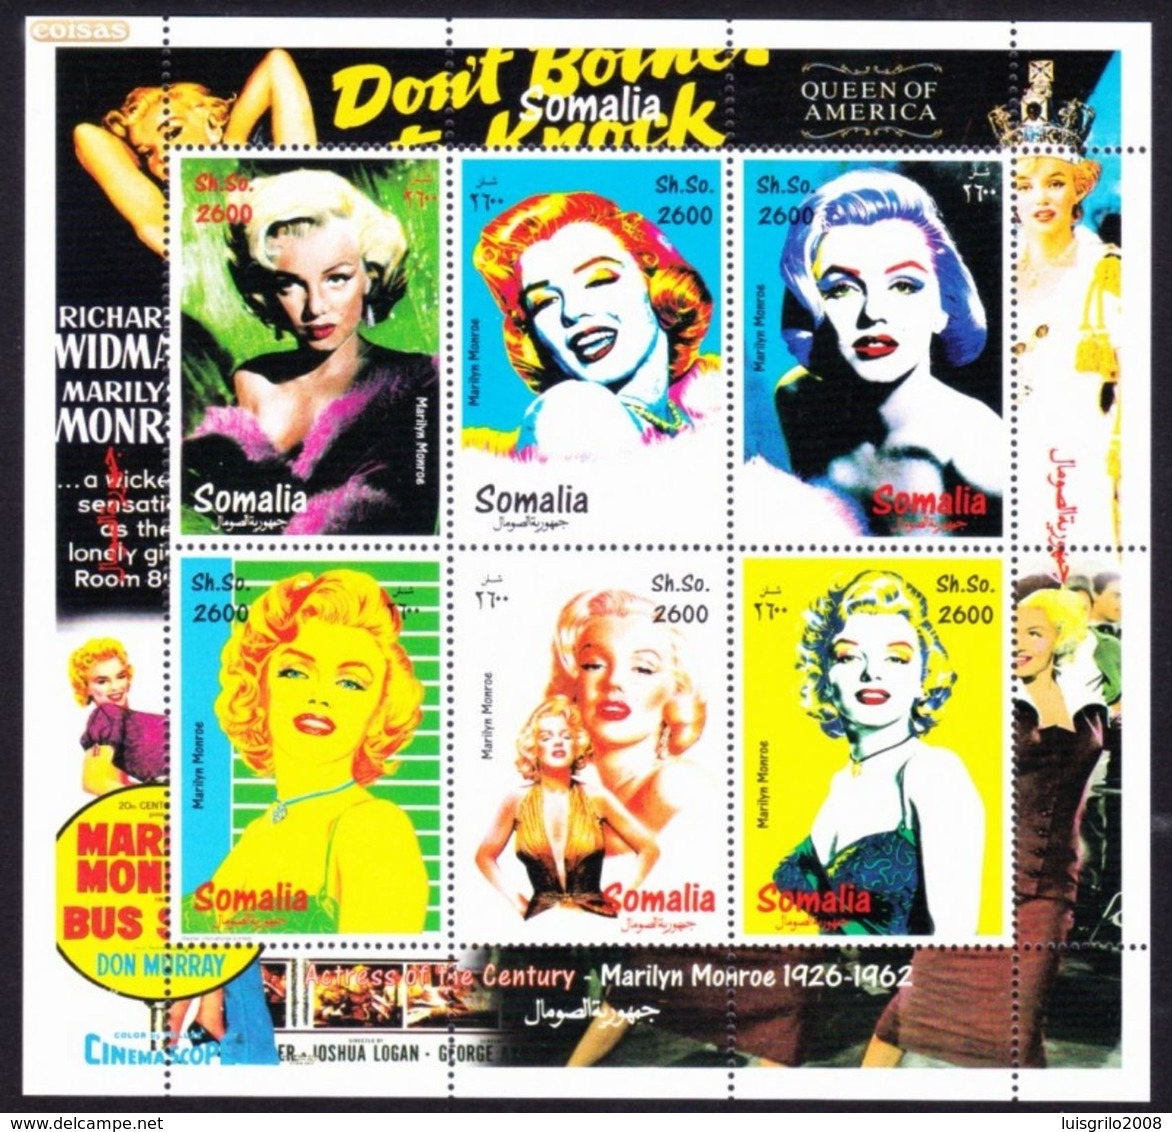 MARILYN MONROE - Queen Of America, Actress Of The Century, Somalia / MNH - Famous Ladies